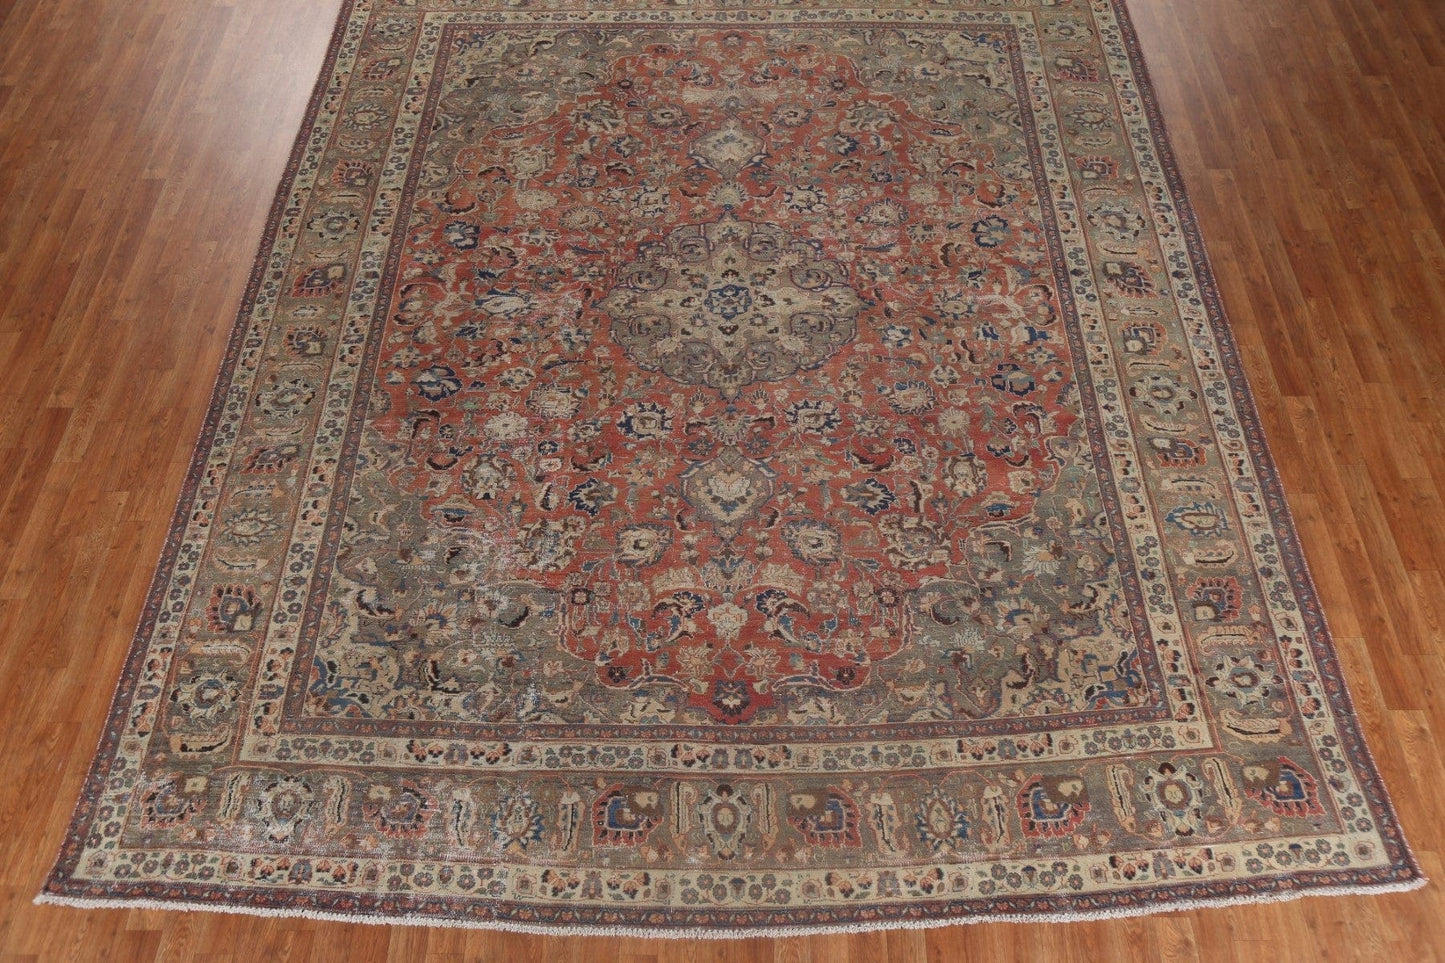 Hand-Knotted Wool Mashad Persian Rug 10x13